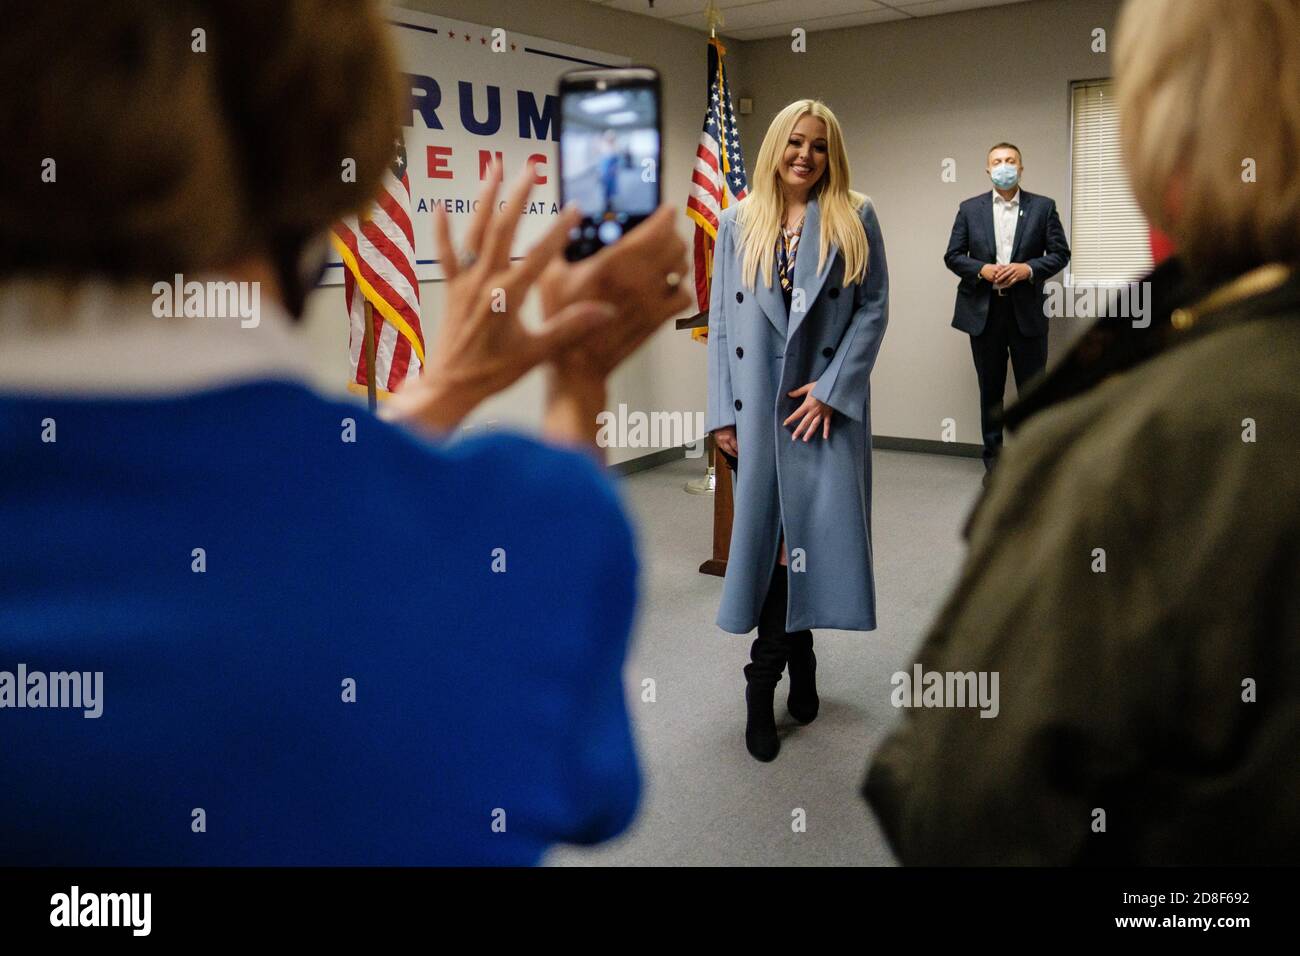 Holland, Ohio, USA. 29th Oct, 2020. TIFFANY TRUMP poses for a picture after delivering remarks at the Lucas County Republican Party Headquarters in Holland, Ohio, a small village outside Toledo. Tiffany Ariana Trump is the fourth child of US president Donald Trump, and the only child with his second wife, Marla Maples. Credit: Andrew Dolph/ZUMA Wire/Alamy Live News Stock Photo